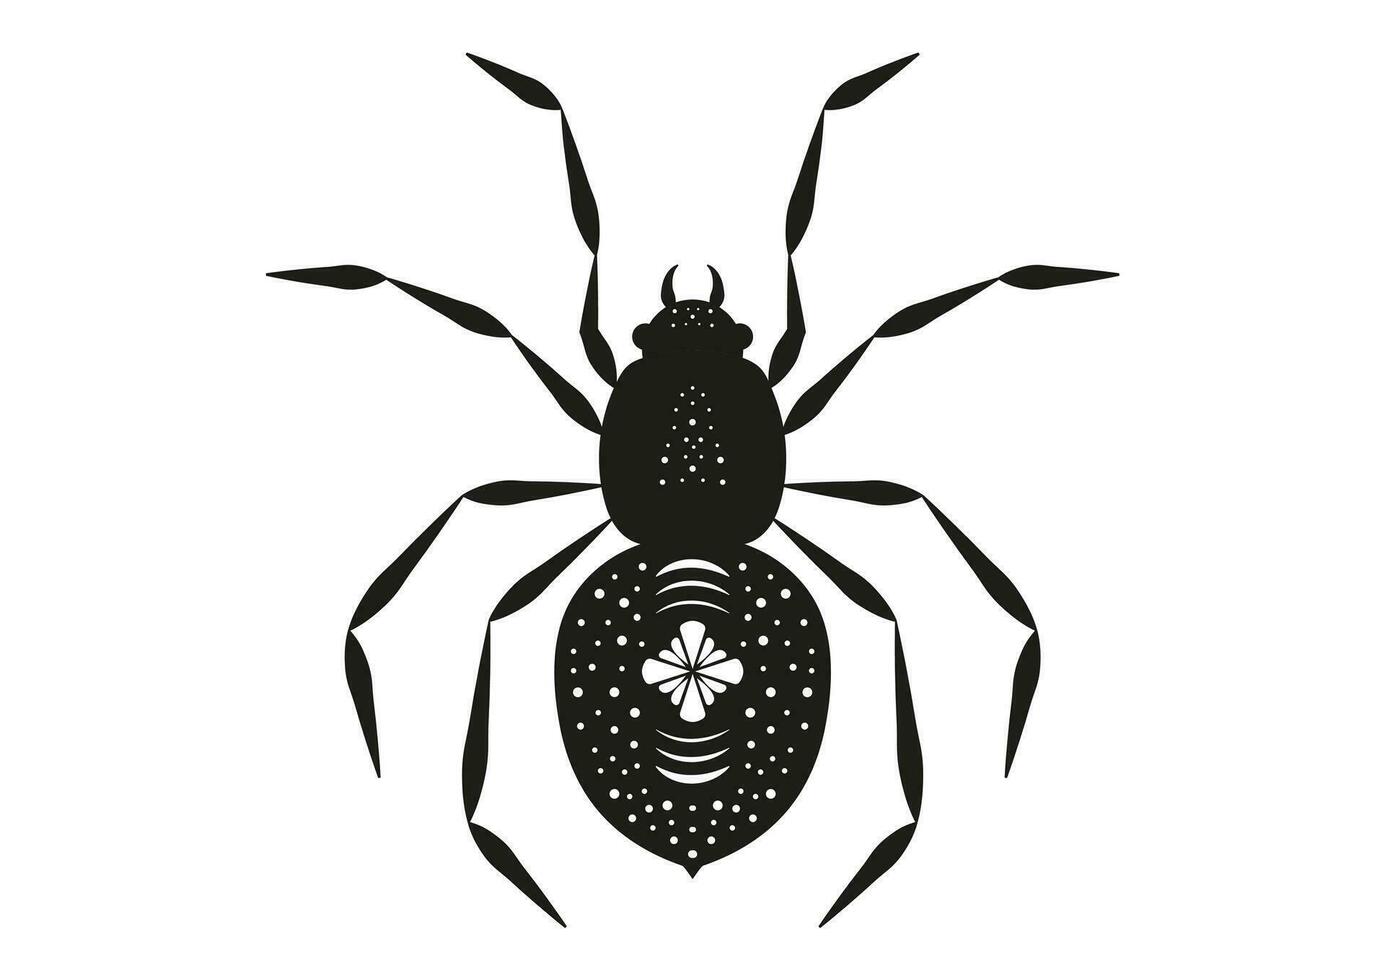 Black and White Spider Silhouette in Flat Style Vector